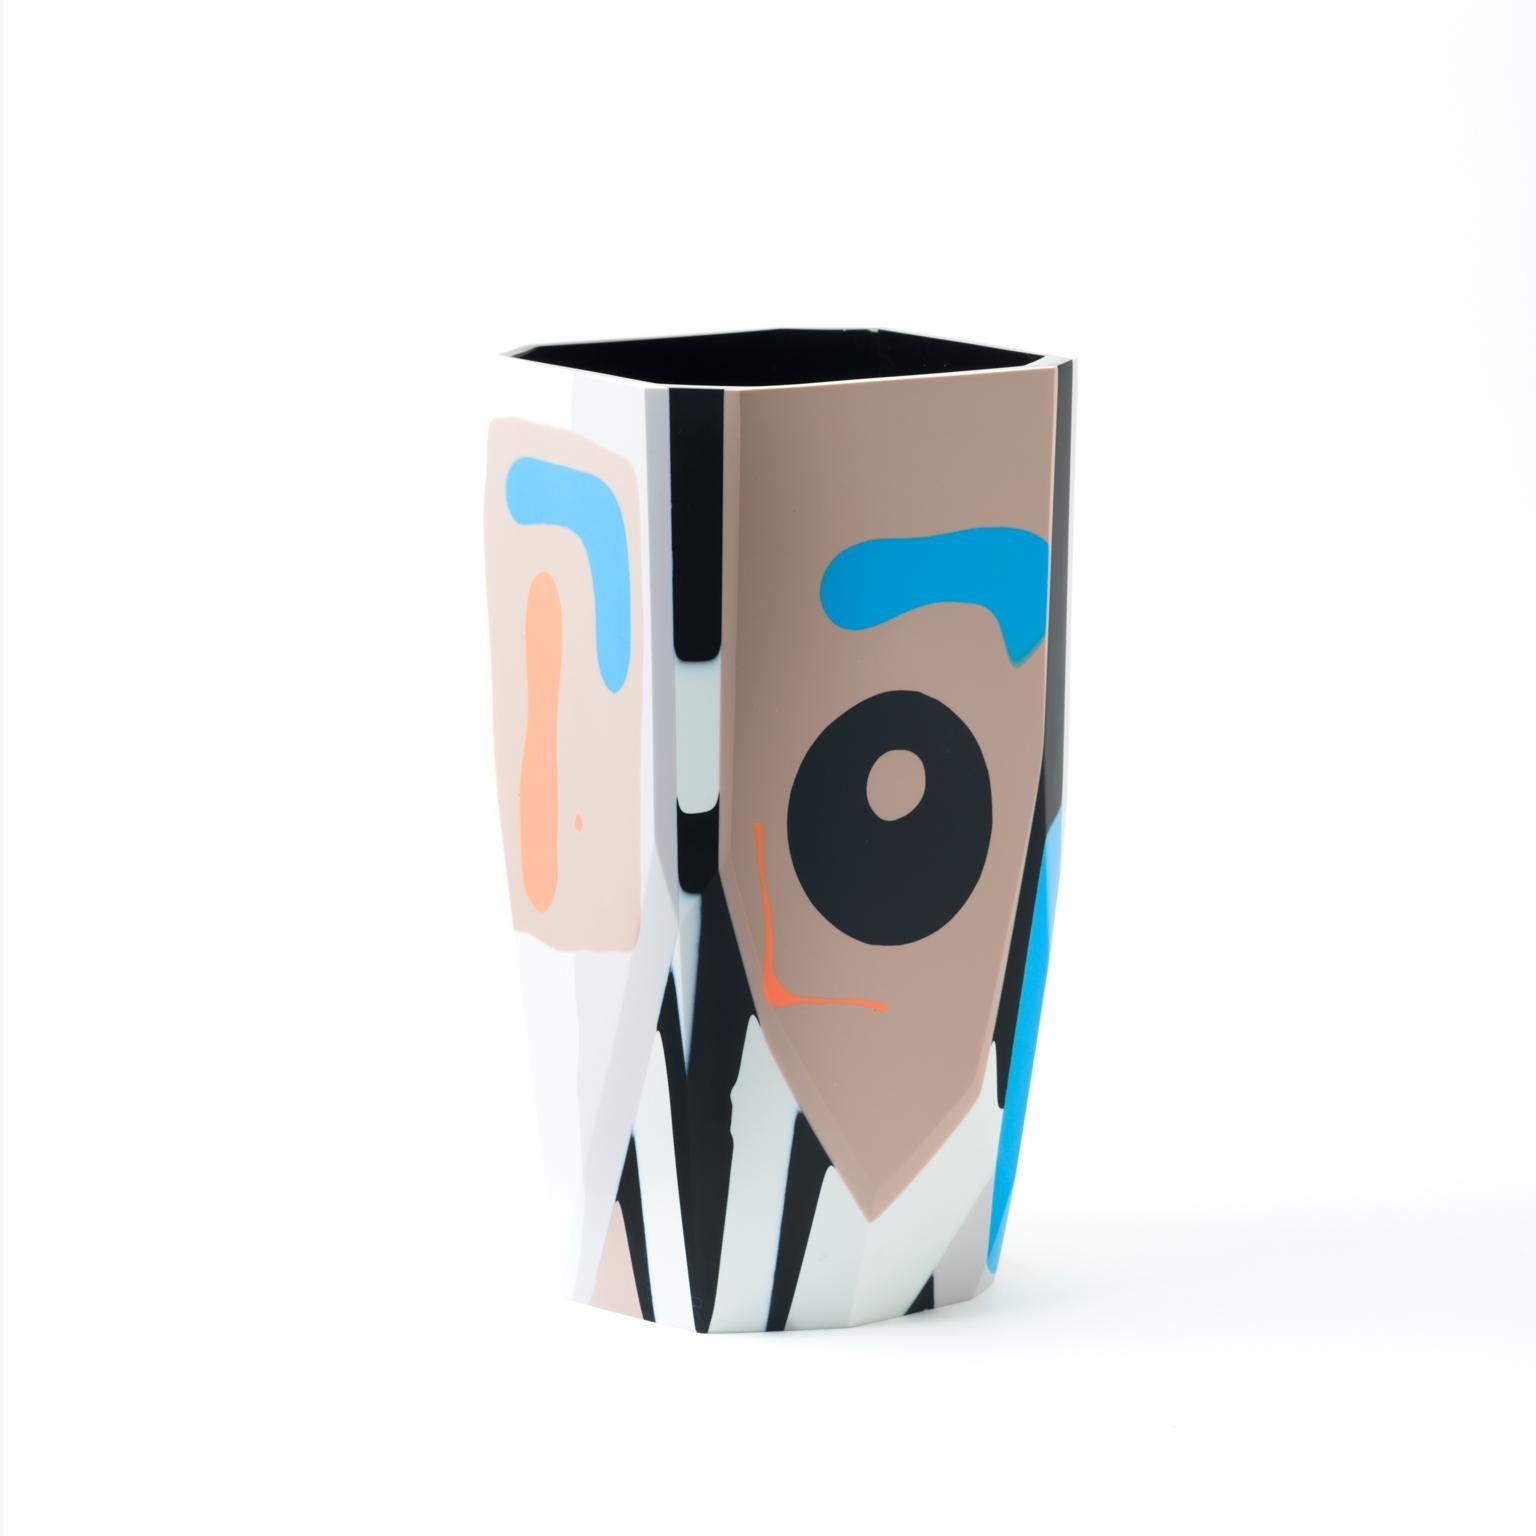 The graphic and bold Kalahari vase is a new addition to our Black Magic collection of resin vessels, inspired by the concept of revealing that which has been hidden from sight, but remains ever-present.

Gazing toward the past, to cultures and